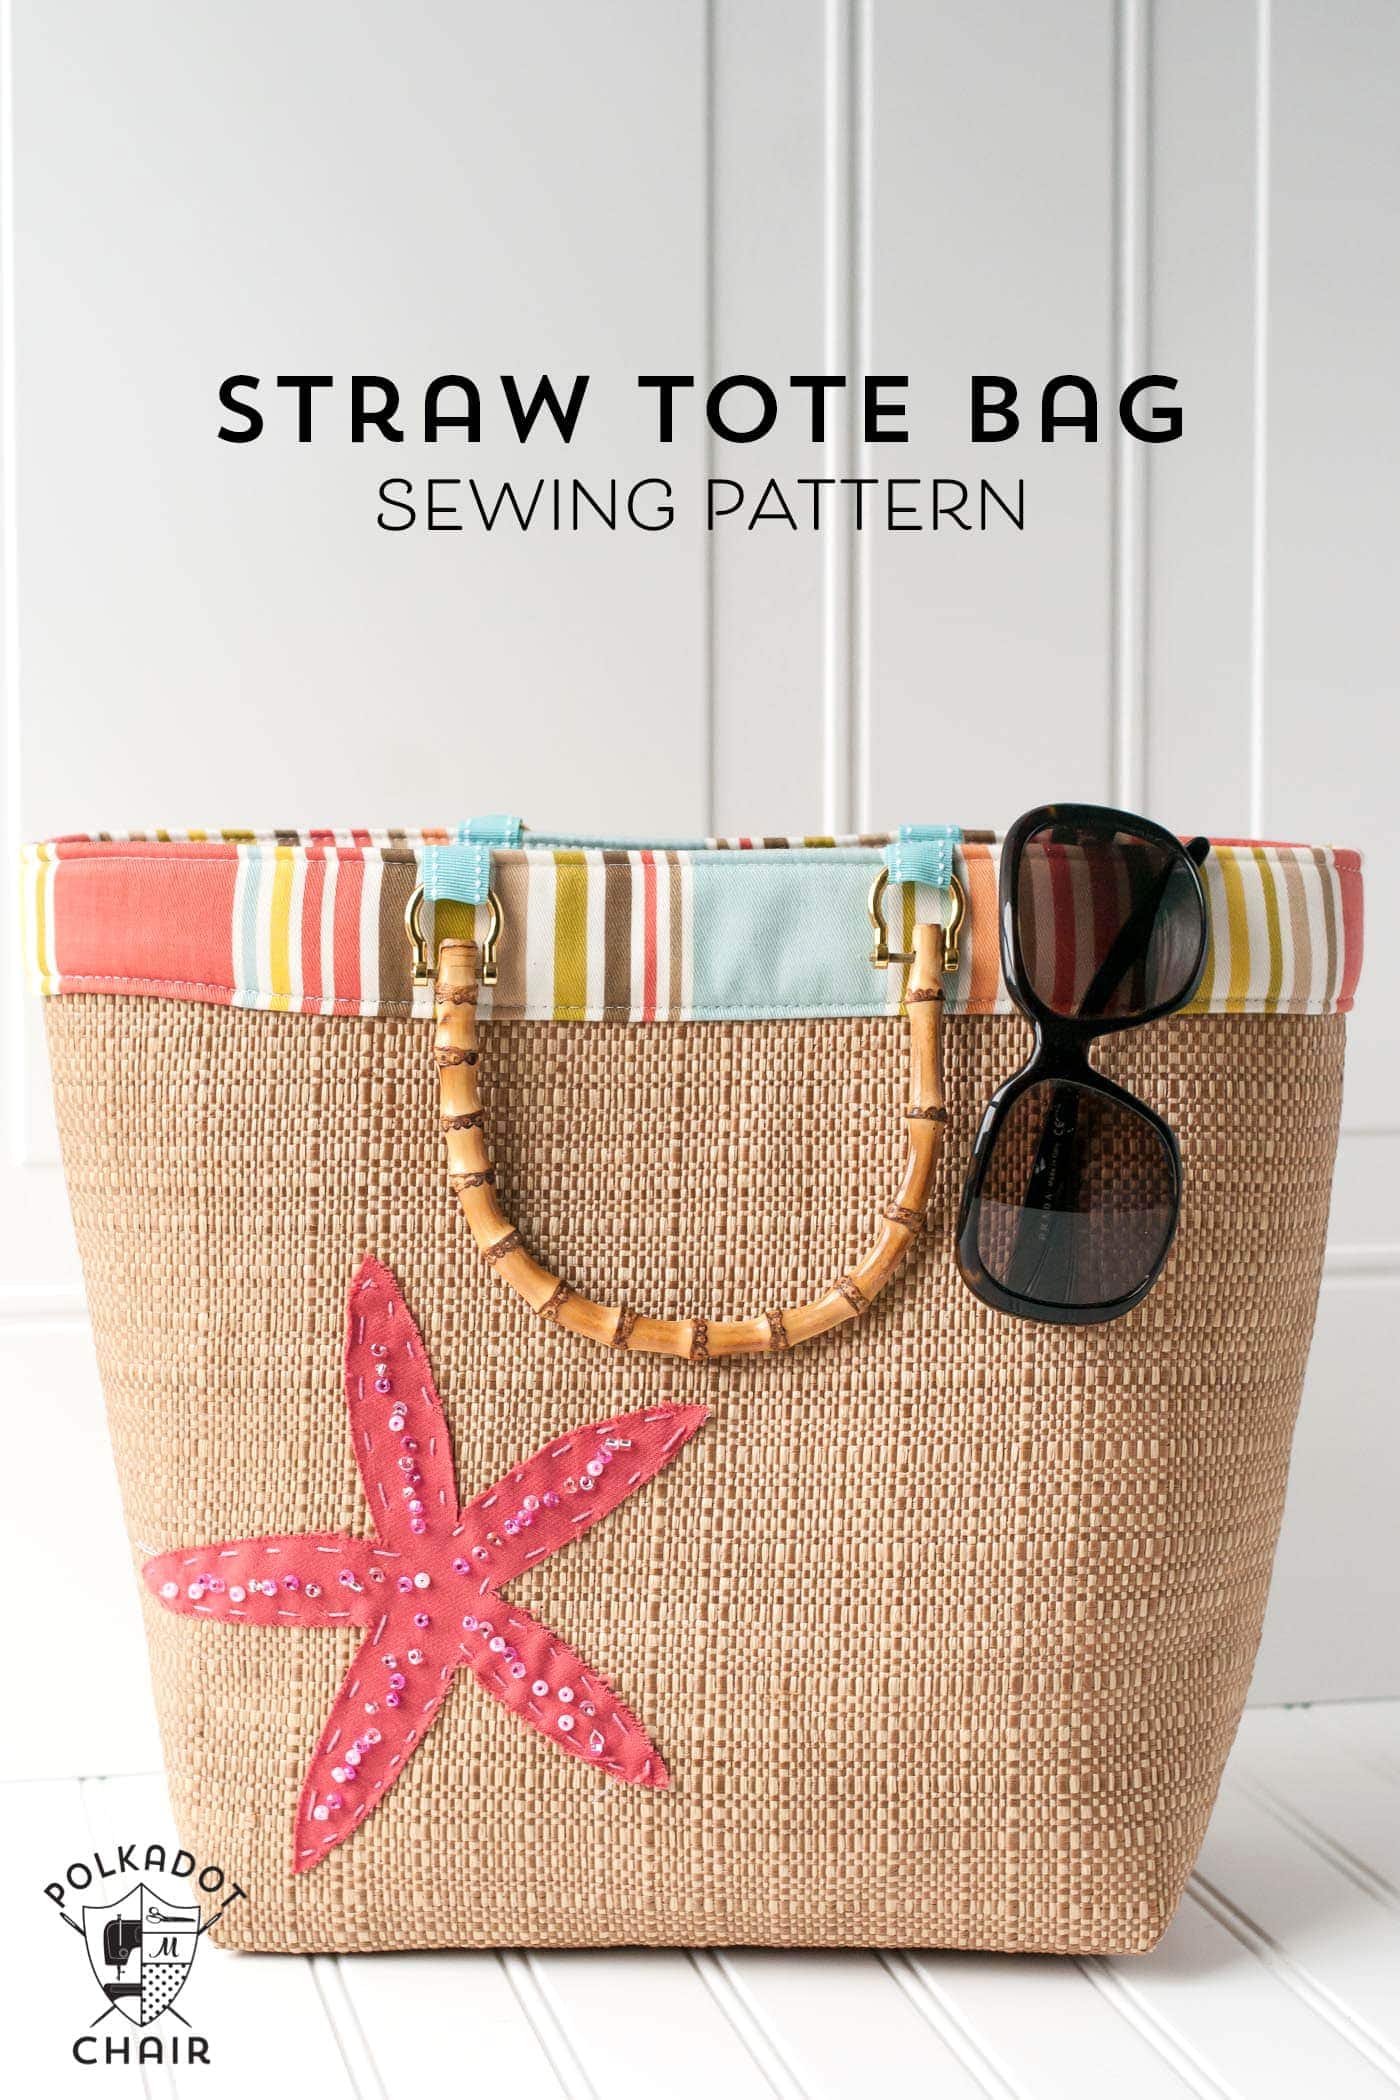 Free Sewing Pattern for a Straw Tote Bag - cute summer beach bag pattern!